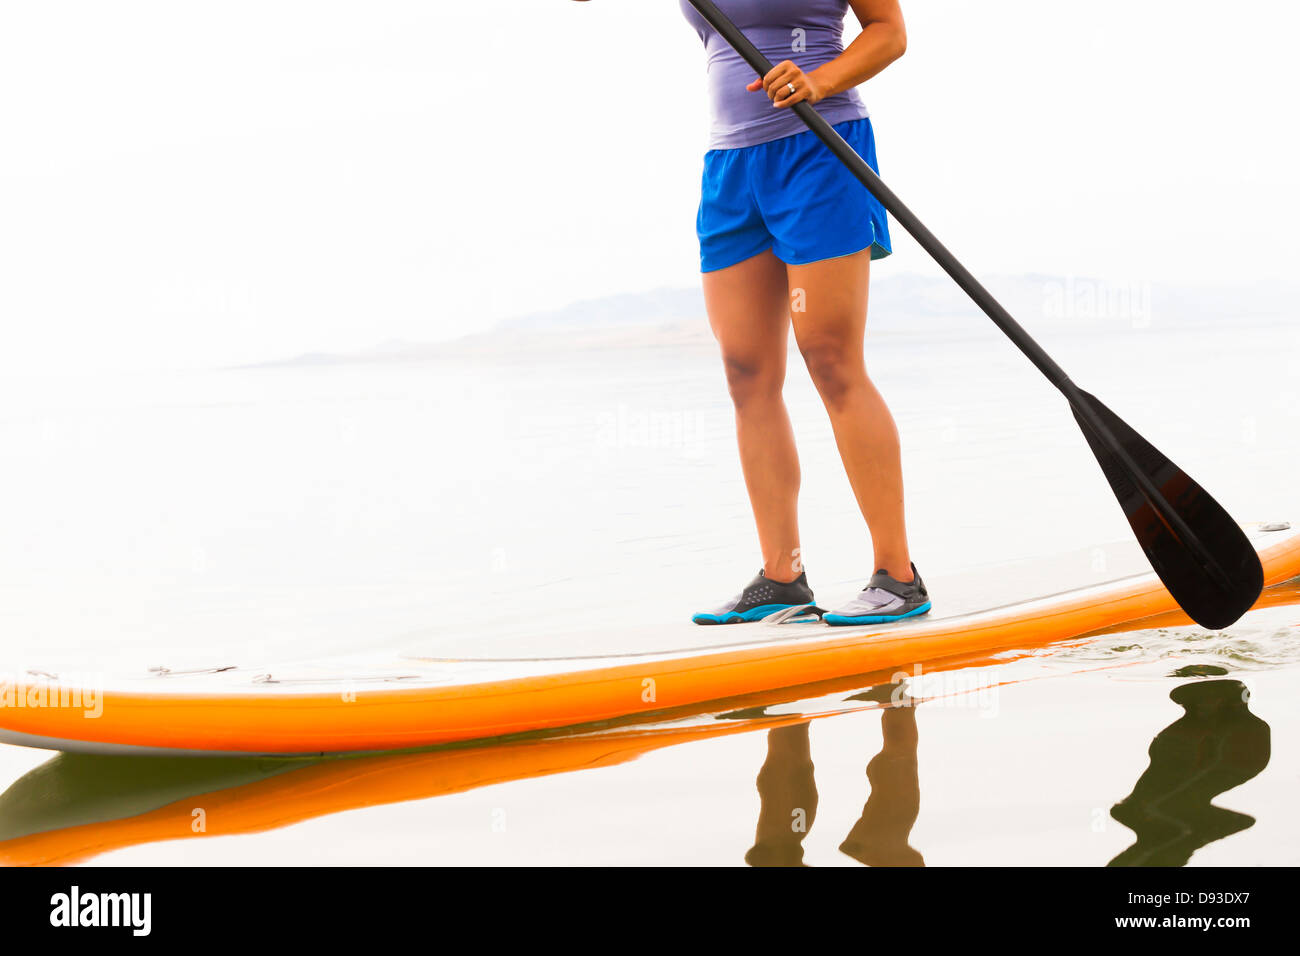 Filipino woman riding paddle board Banque D'Images